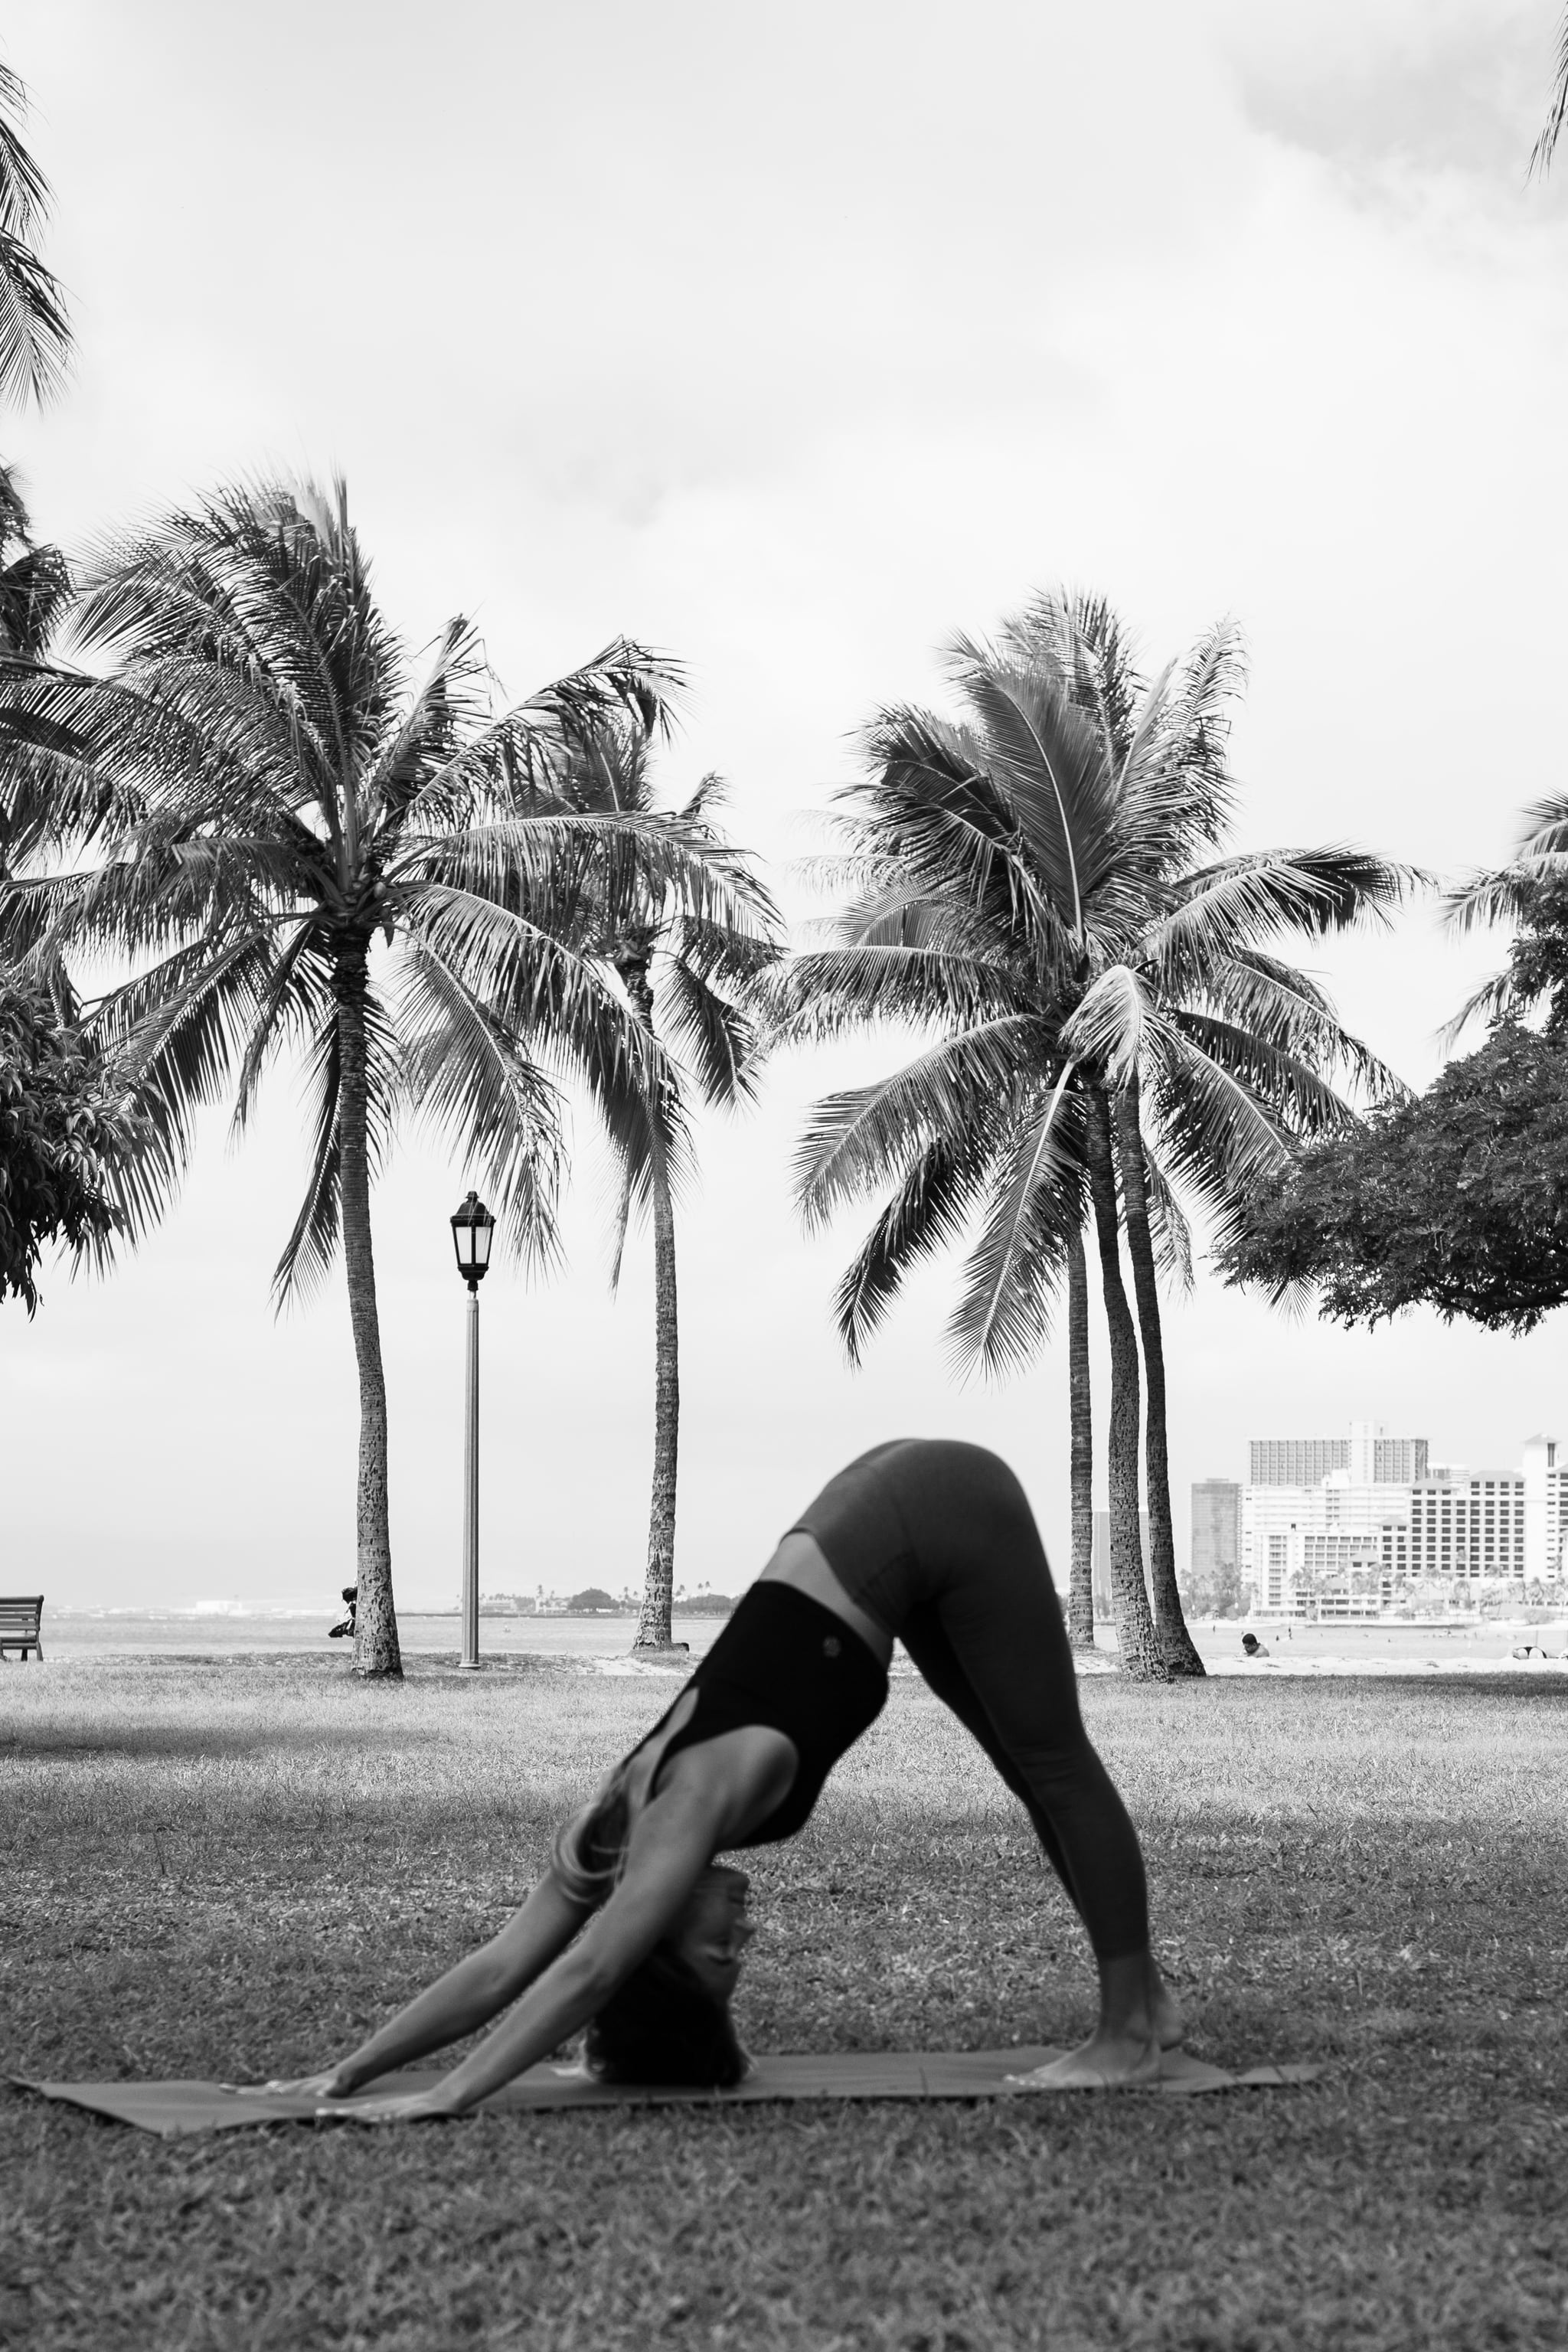 Fitness Wallpaper: Black And White Yoga Gym Wallpaper For Your Phone That Will Motivate You To Work Out